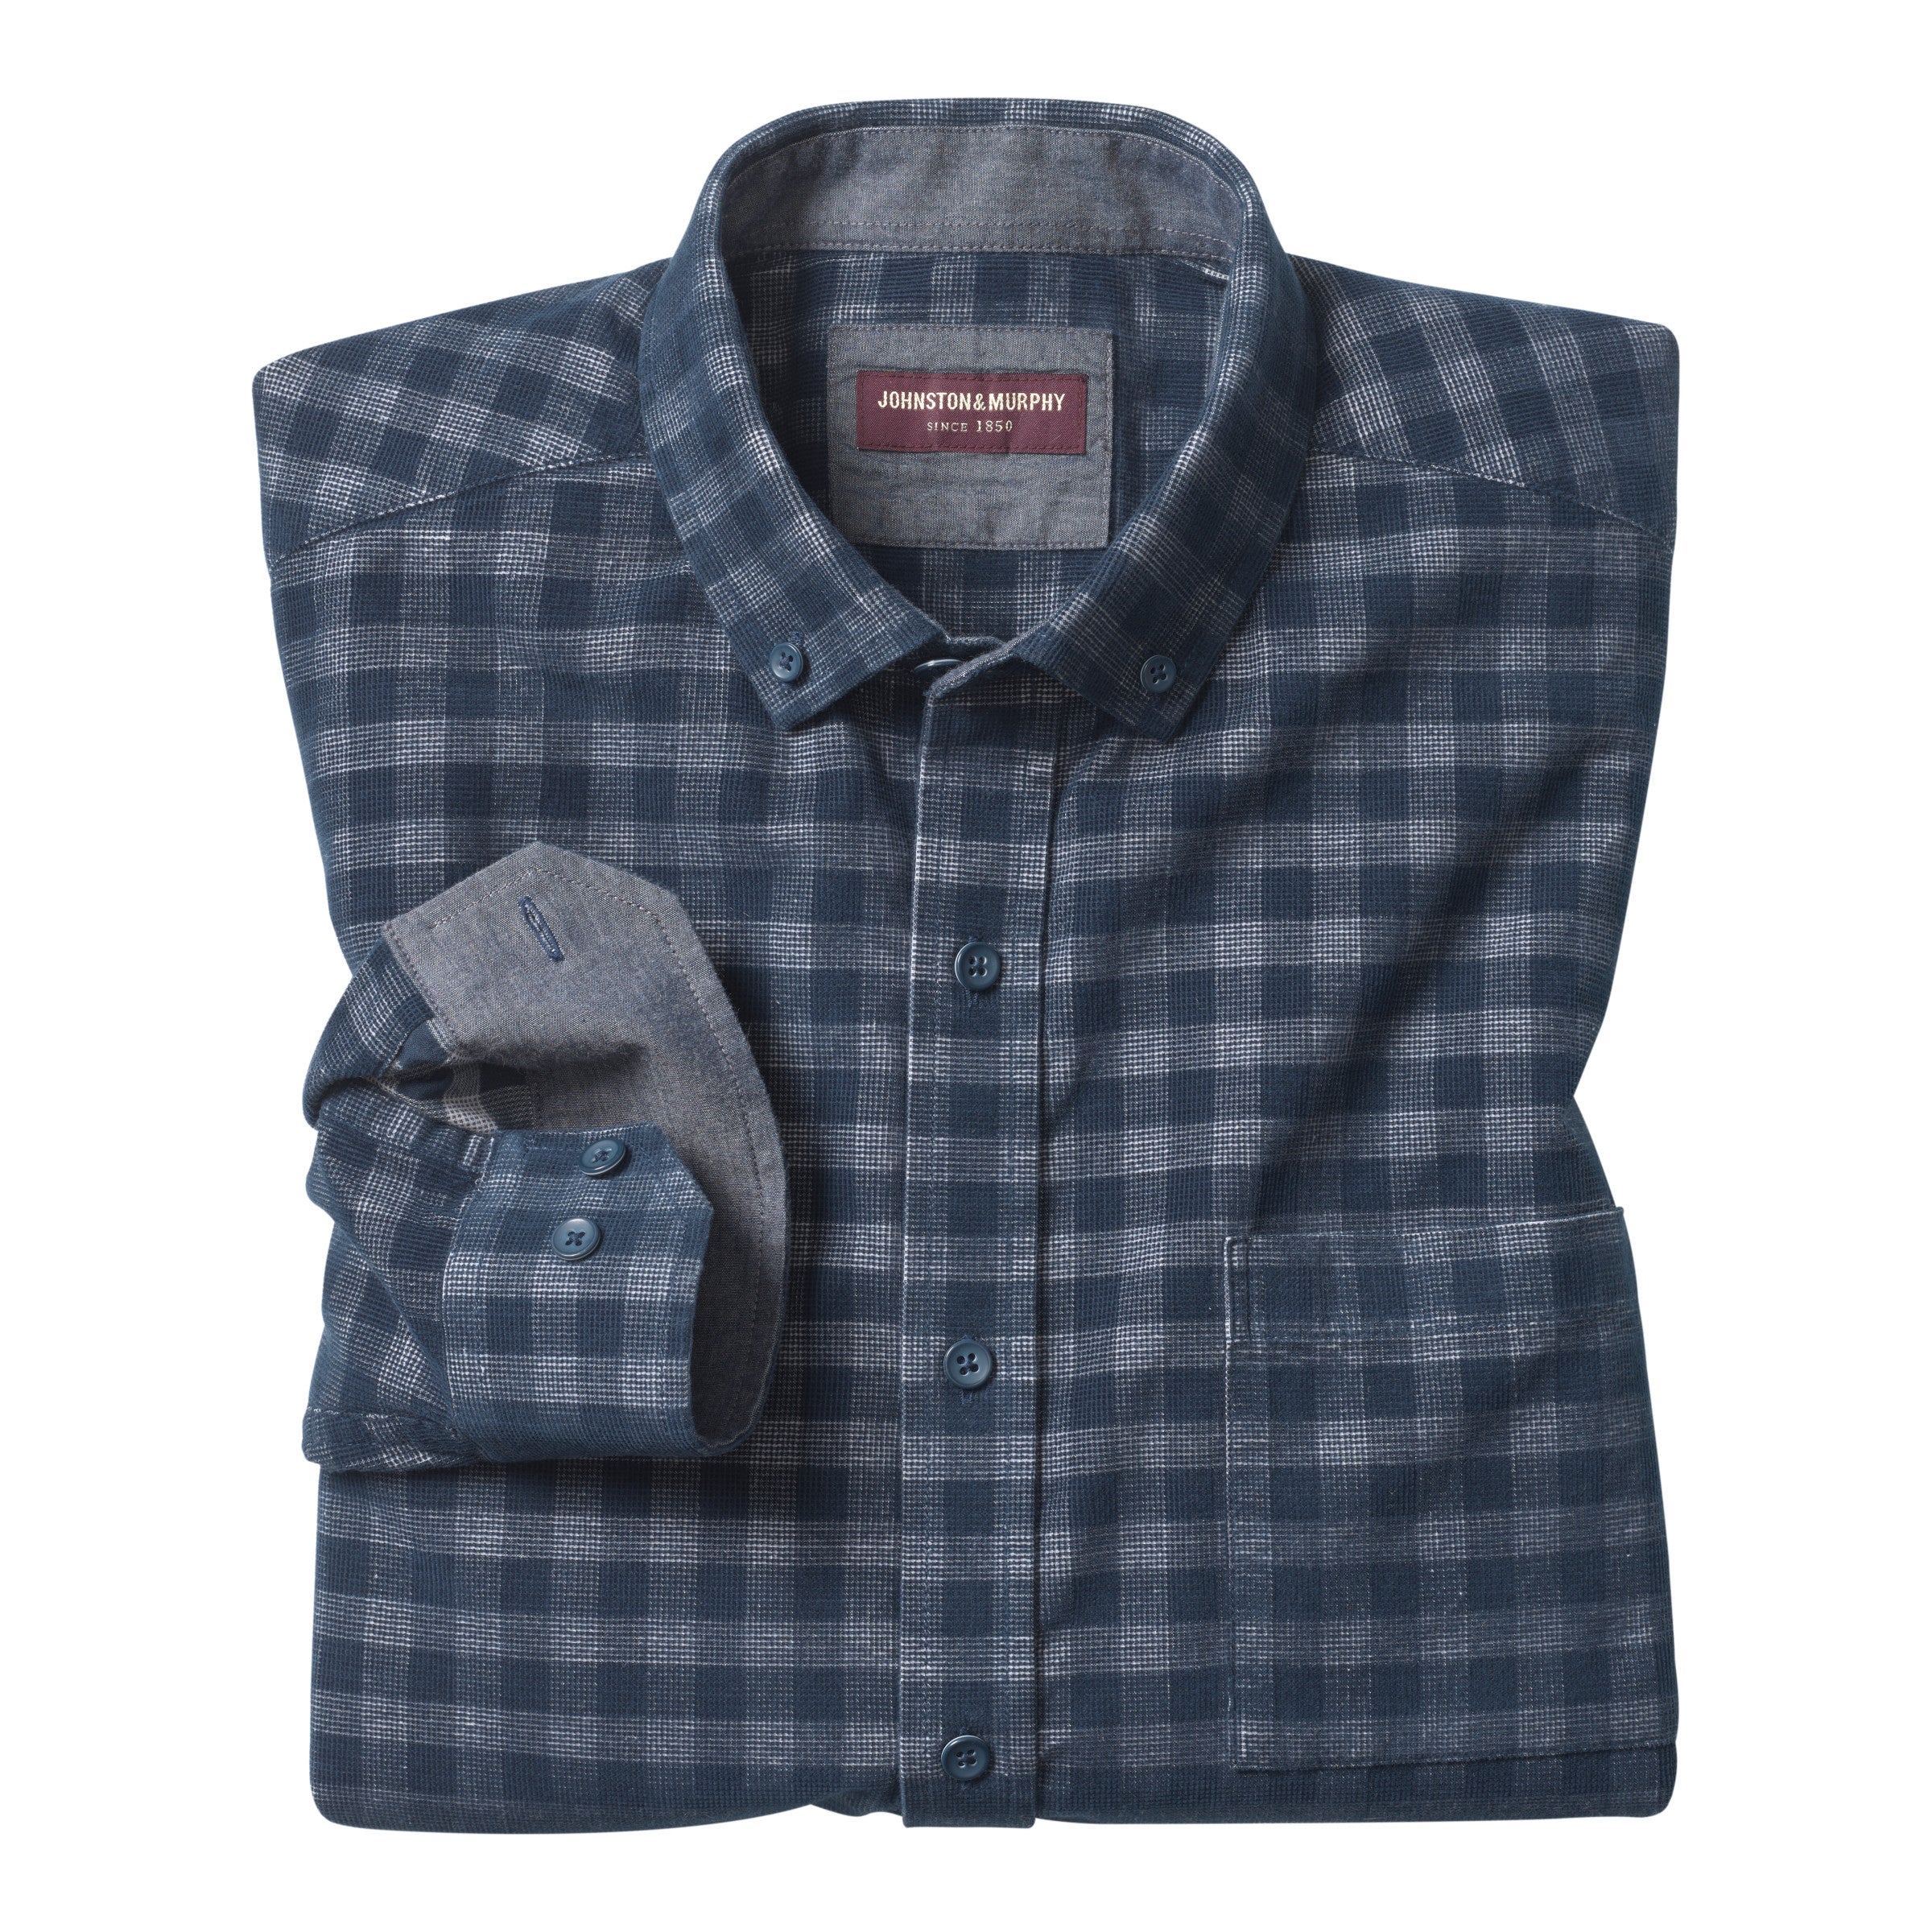 This Johnston & Murphy corduroy shirt is the perfect way to make a statement! 